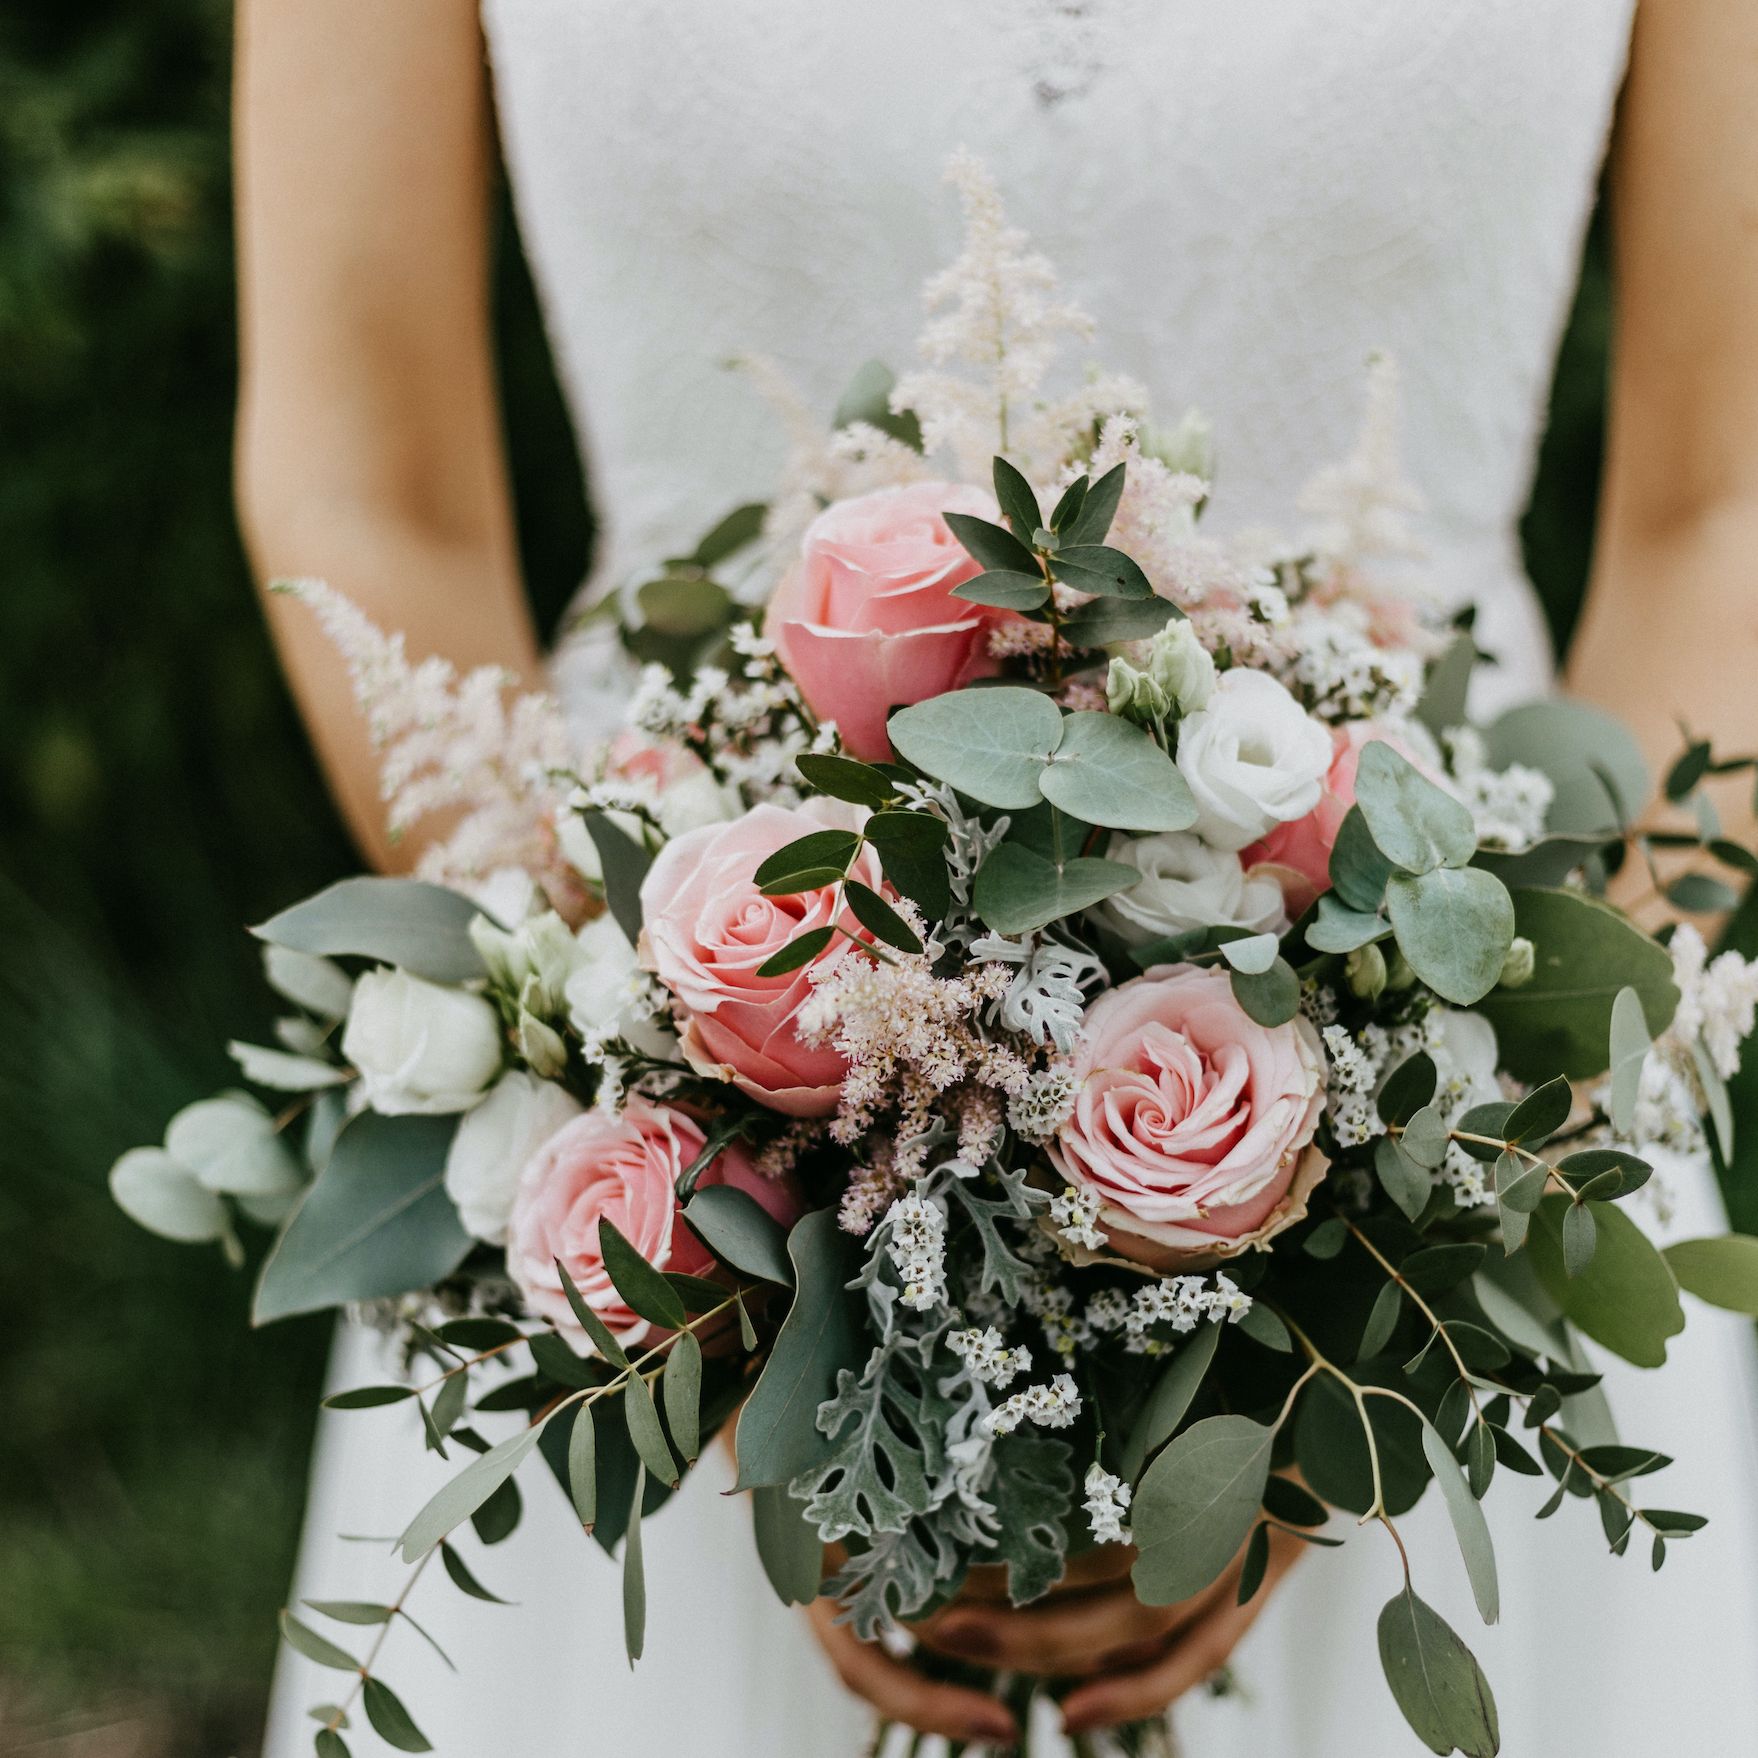 How to Grow Your Own Wedding Flowers, According to Sarah Raven